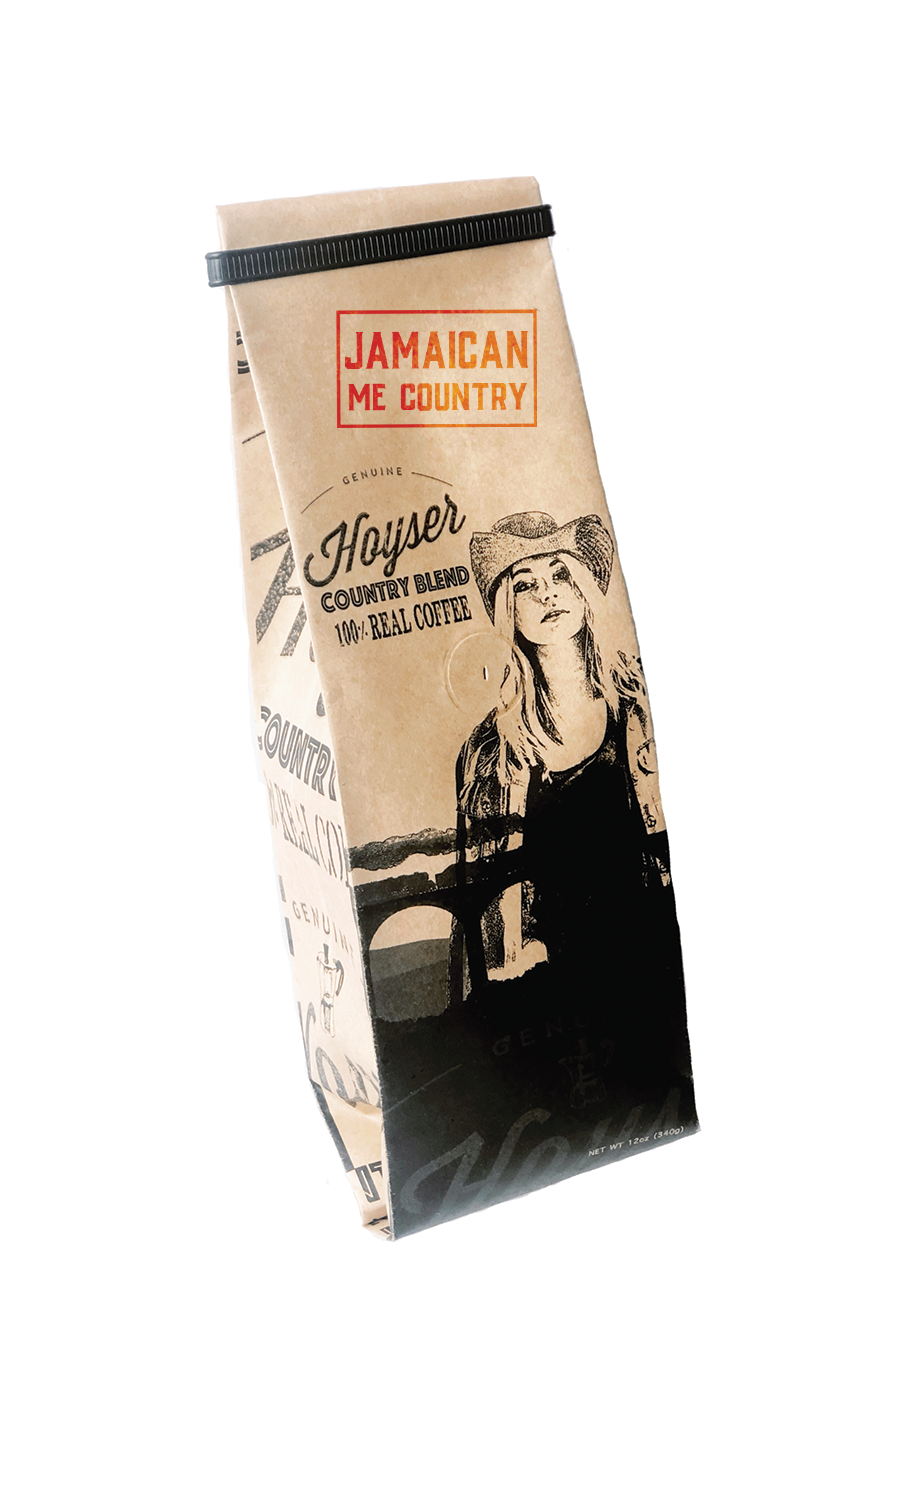 Jamaican Me Country - Hoyser Country Blend (12oz Ground Coffee)